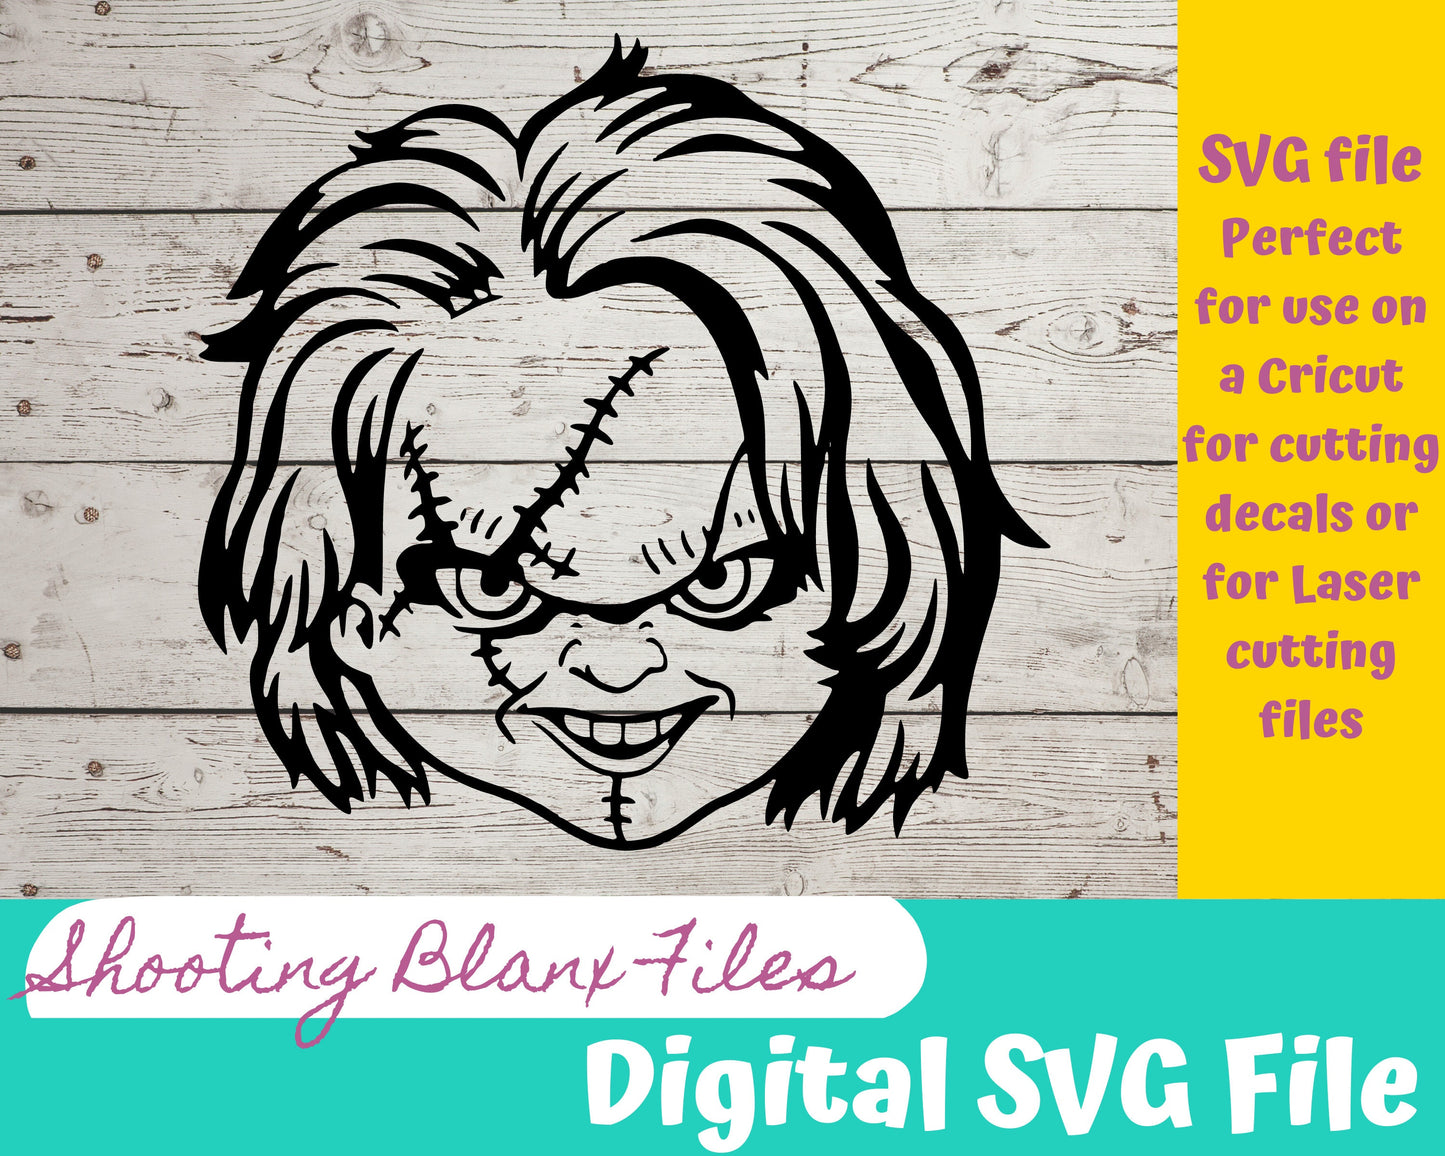 Bride of a evil doll SVG file perfect for Cricut, Cameo, or Silhouette also for laser engraving Glowforge, Scary, Halloween, Tiffany